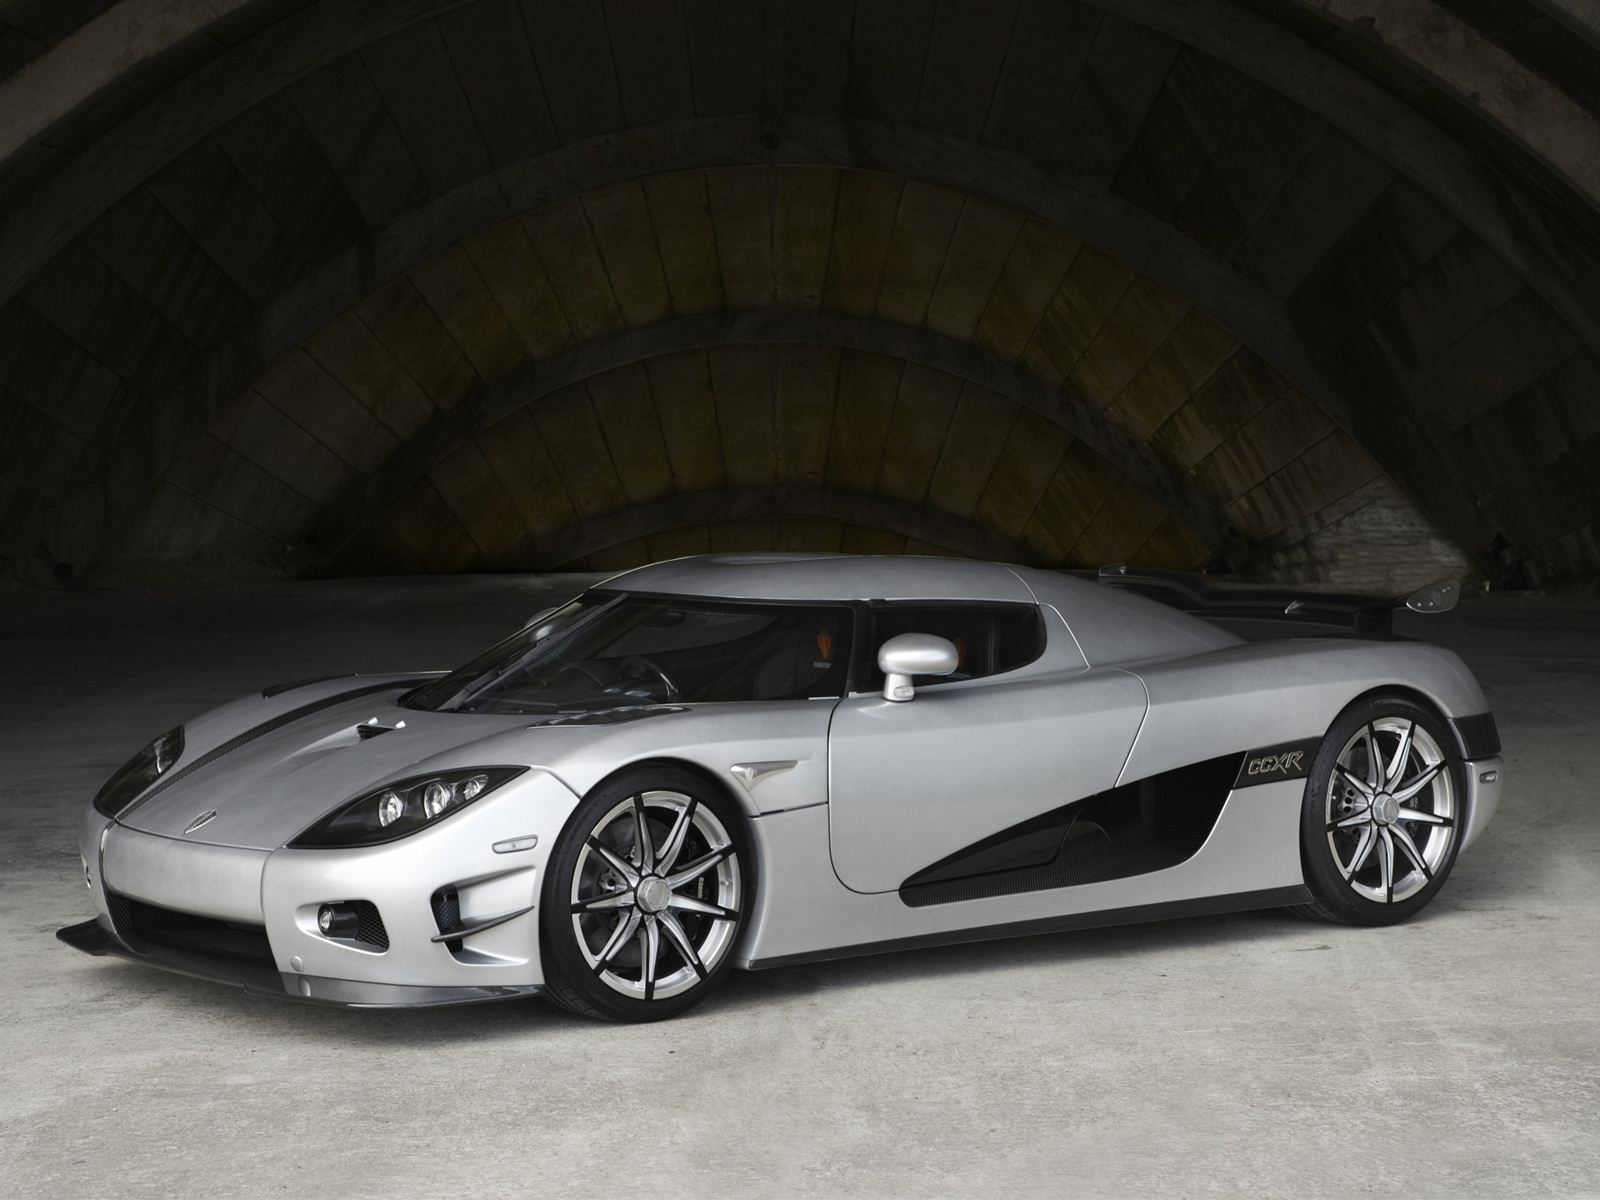 The Koenigsegg Trevita is a 2 door coupe with a starting MSRP of 2,200,000Top Speed 250 MPH, 0-60 2.8 in Seconds